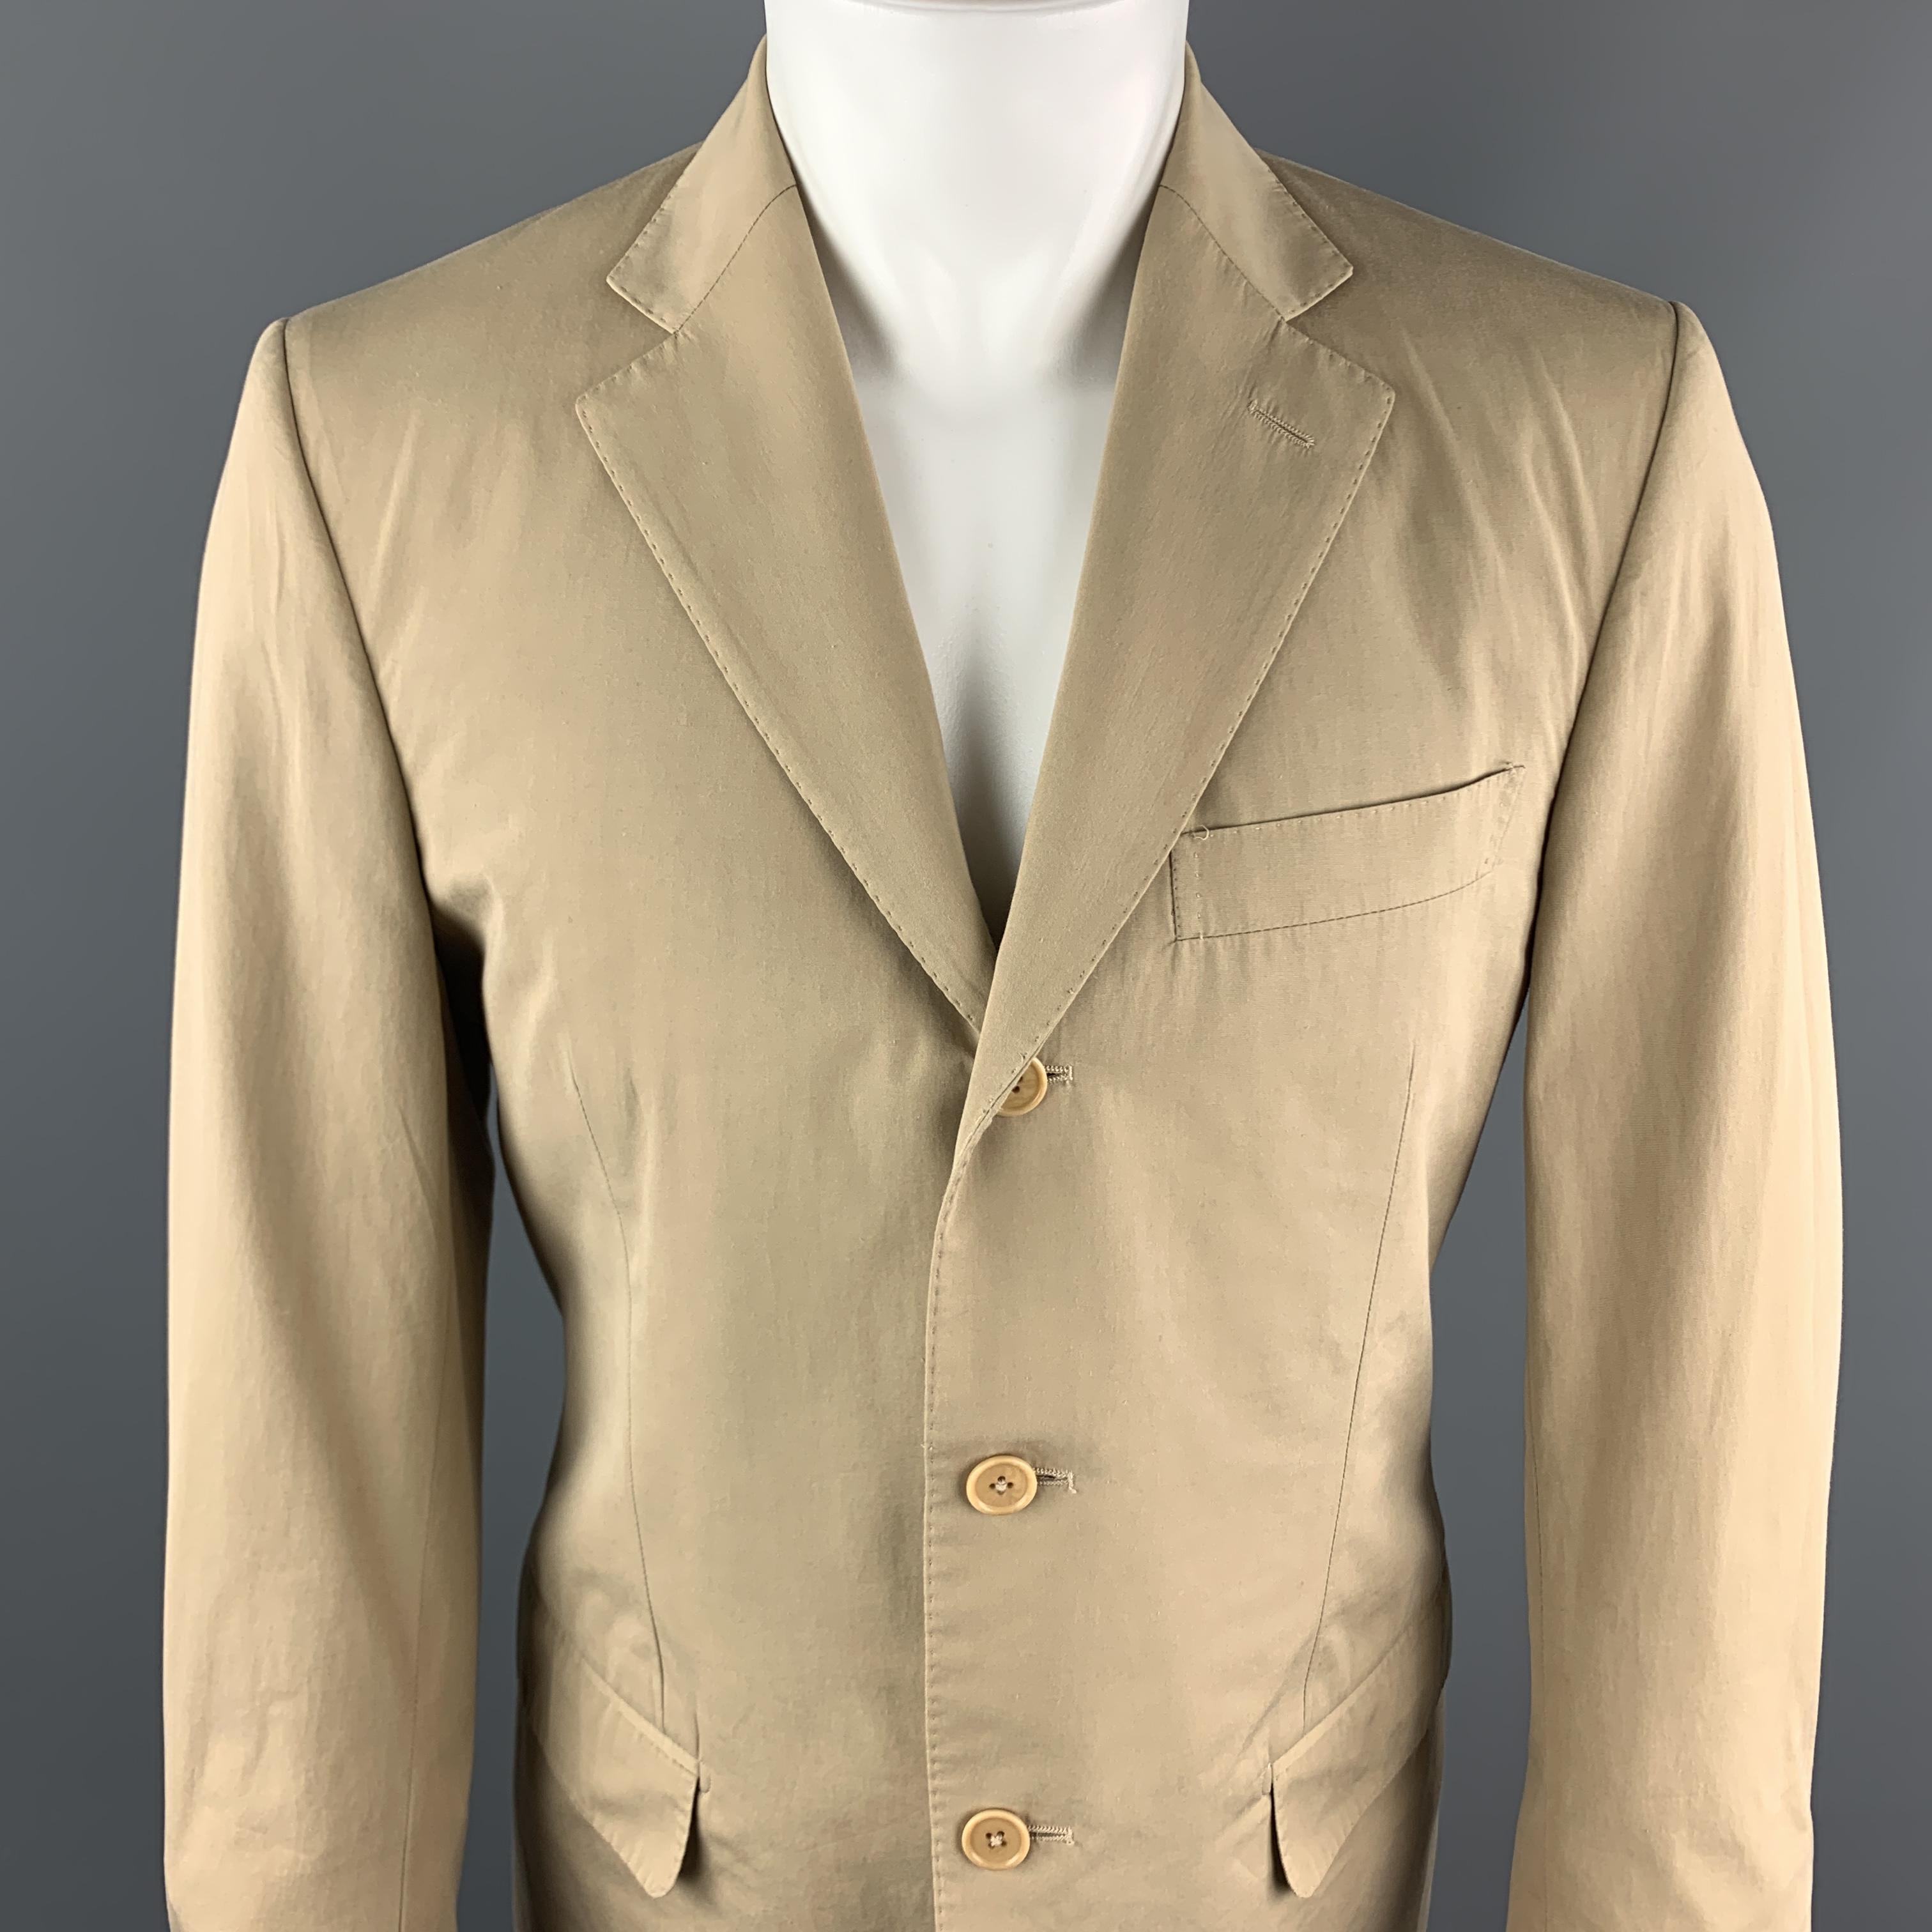 LUCIANO BARBERA suit comes in a khaki cotton and includes a single breasted, three button sport coat with a notch lapel and matching front trousers. Made in Italy. 

Excellent Pre-Owned Condition.
Marked: 48

Measurements:

-Jacket
Shoulder: 17 in.